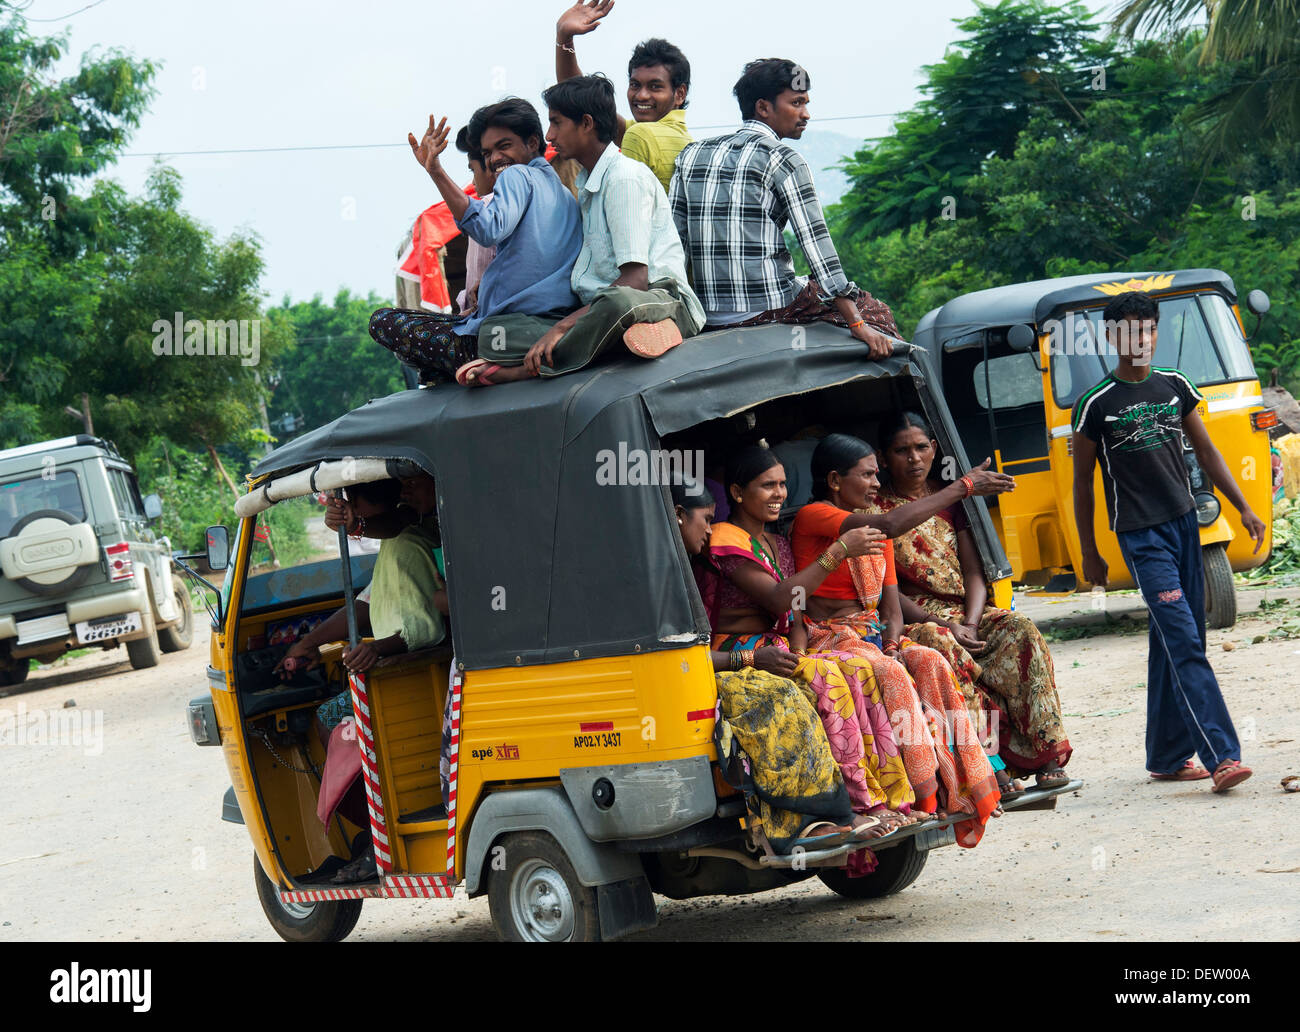 Indian auto rickshaw full of people, with passengers sitting on the roof. Andhra Pradesh, India Stock Photo